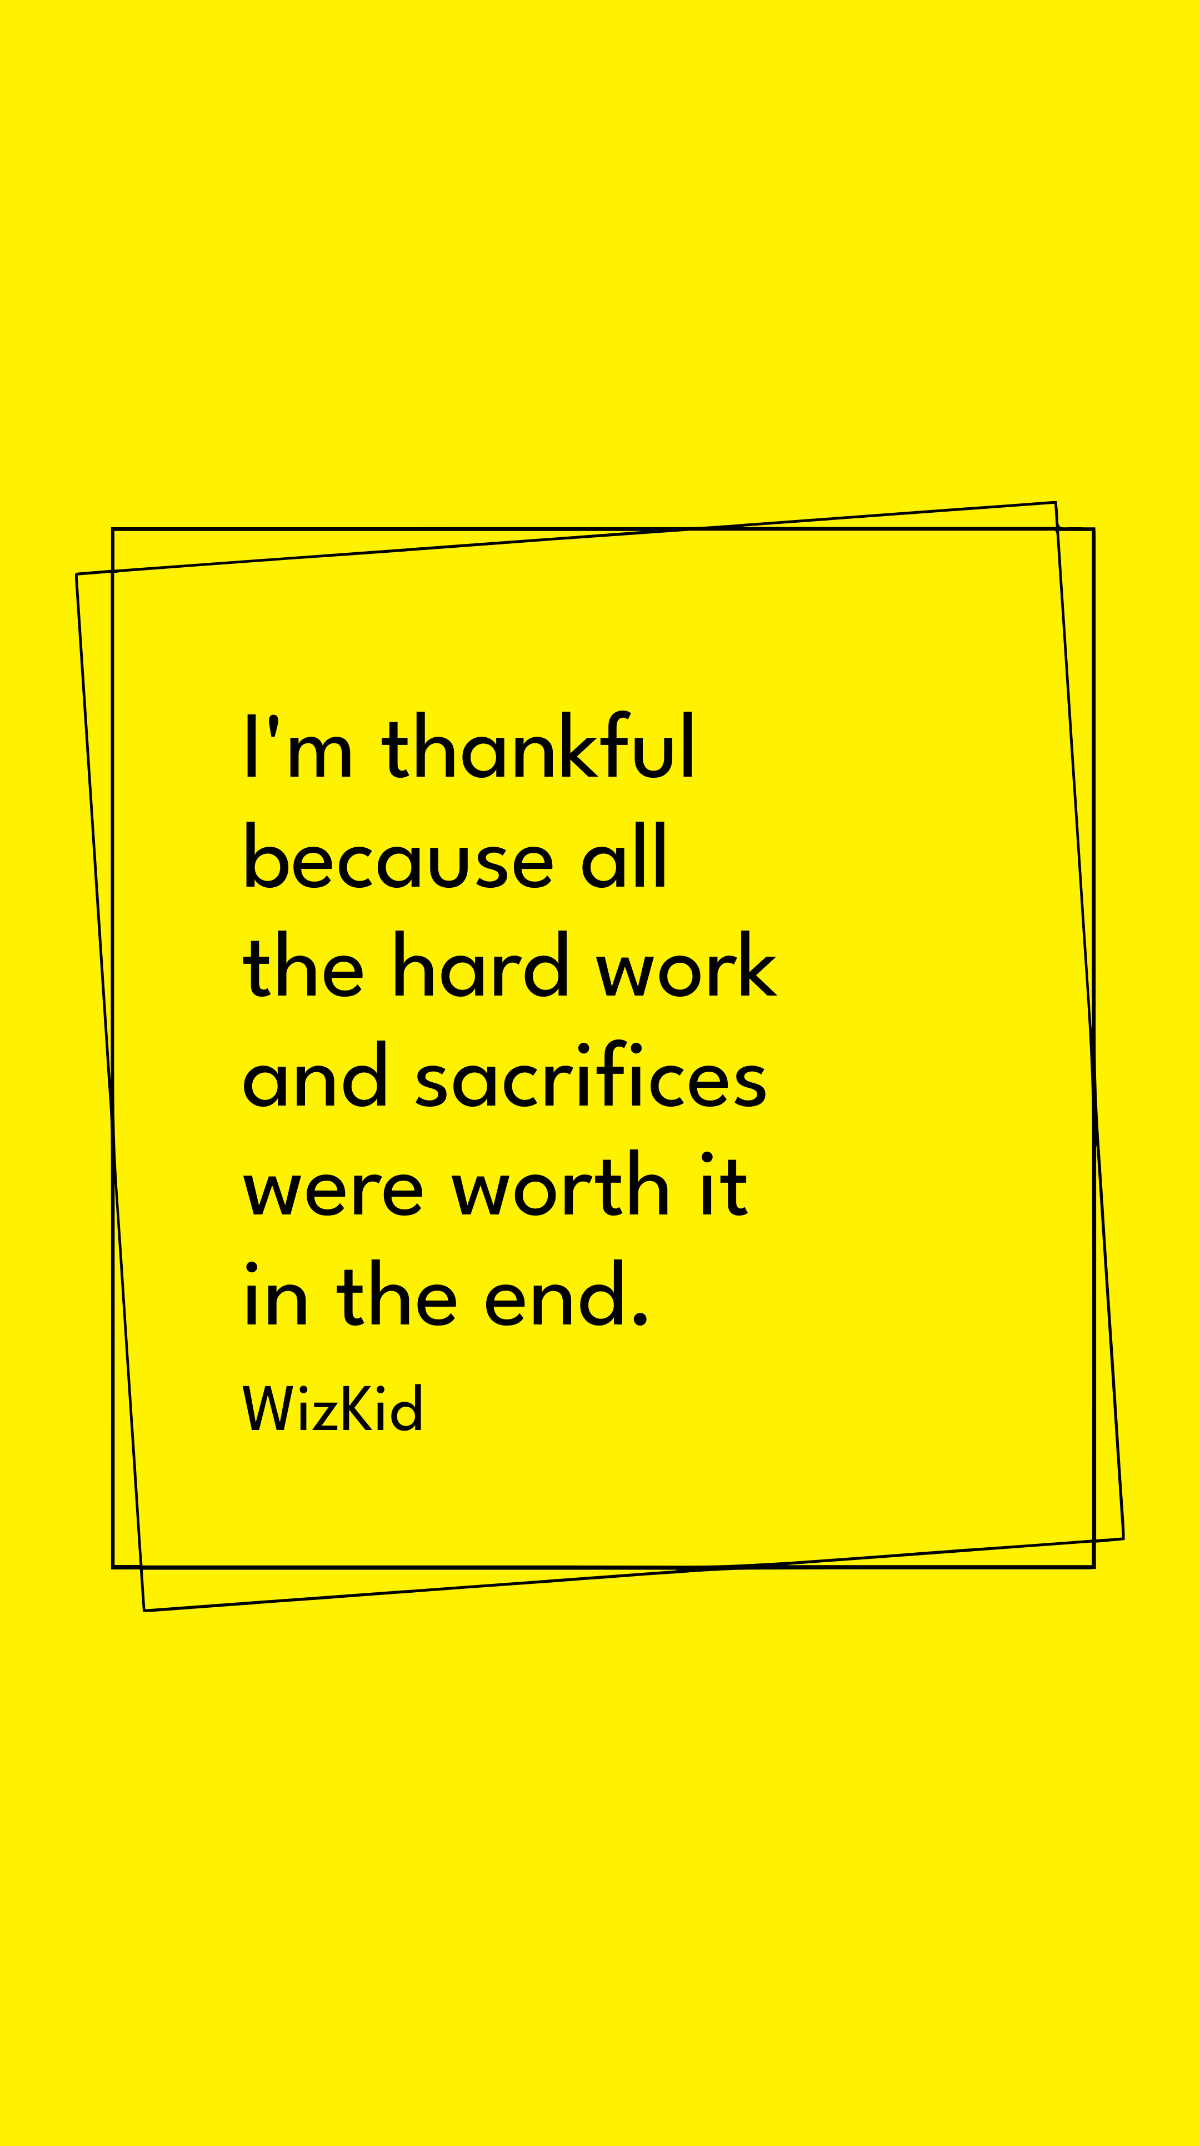 Free WizKid - I'm thankful because all the hard work and sacrifices were worth it in the end. Template